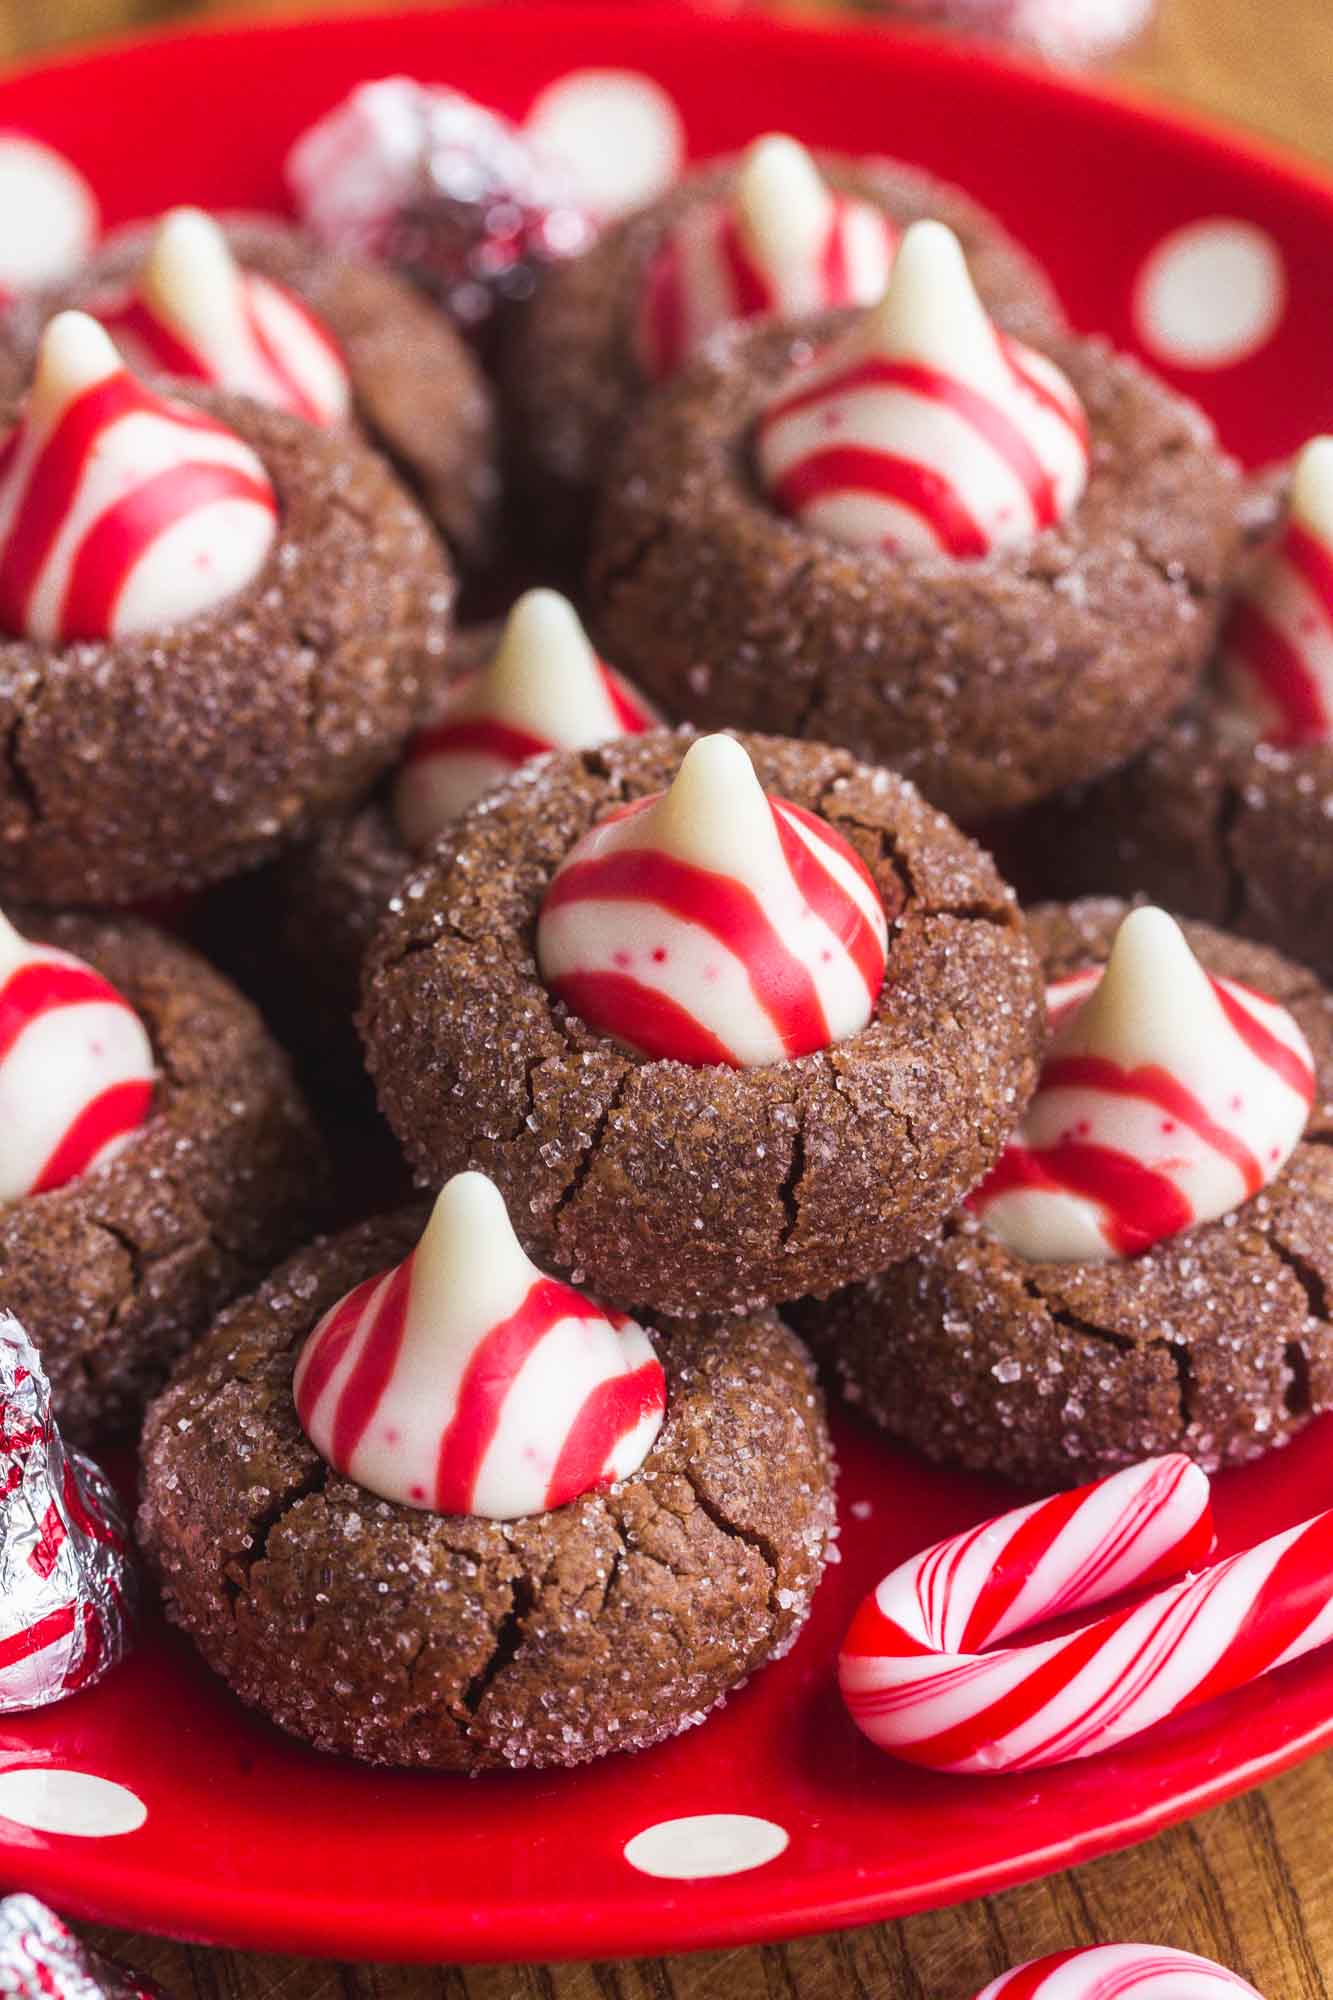 Chocolate Blossom Cookies with Peppermint hershey's kisses, on a red and white plate with candy canes on the side